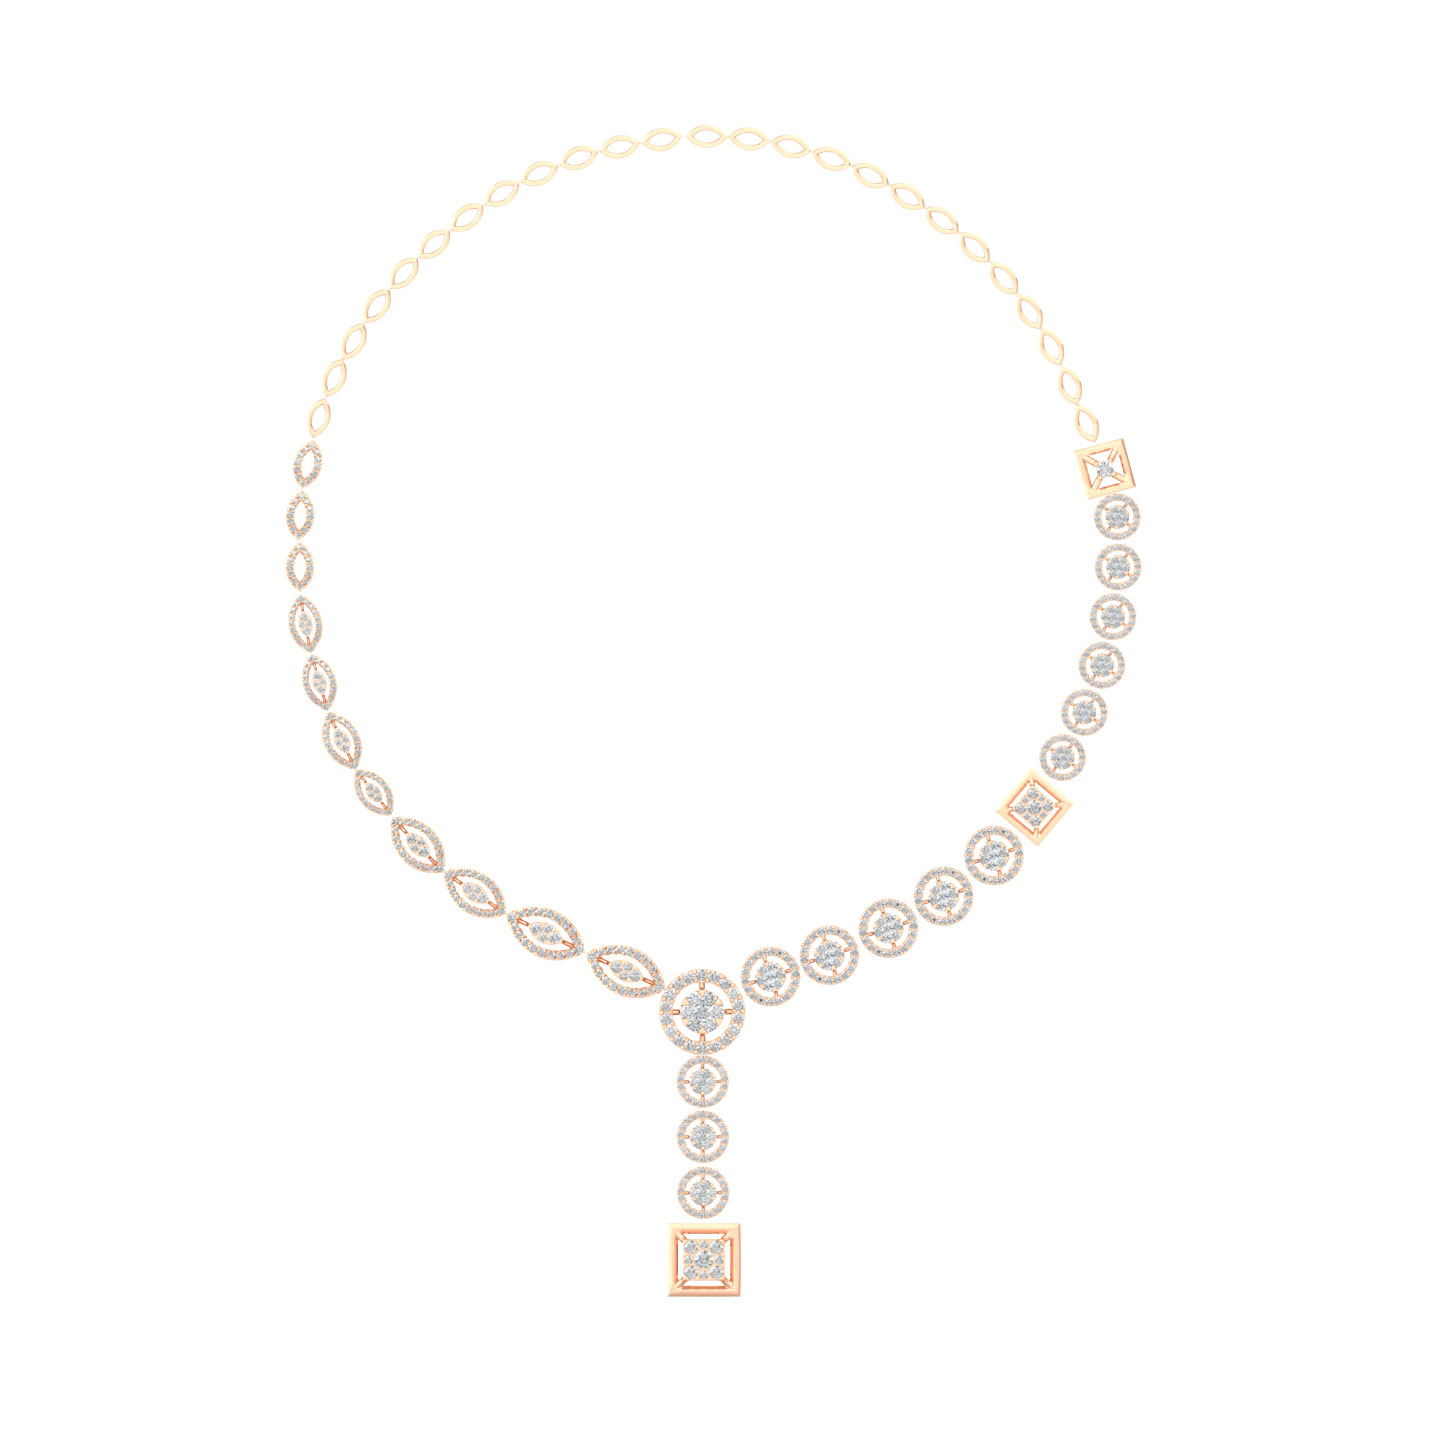 Divit Round Diamond Necklace For Her